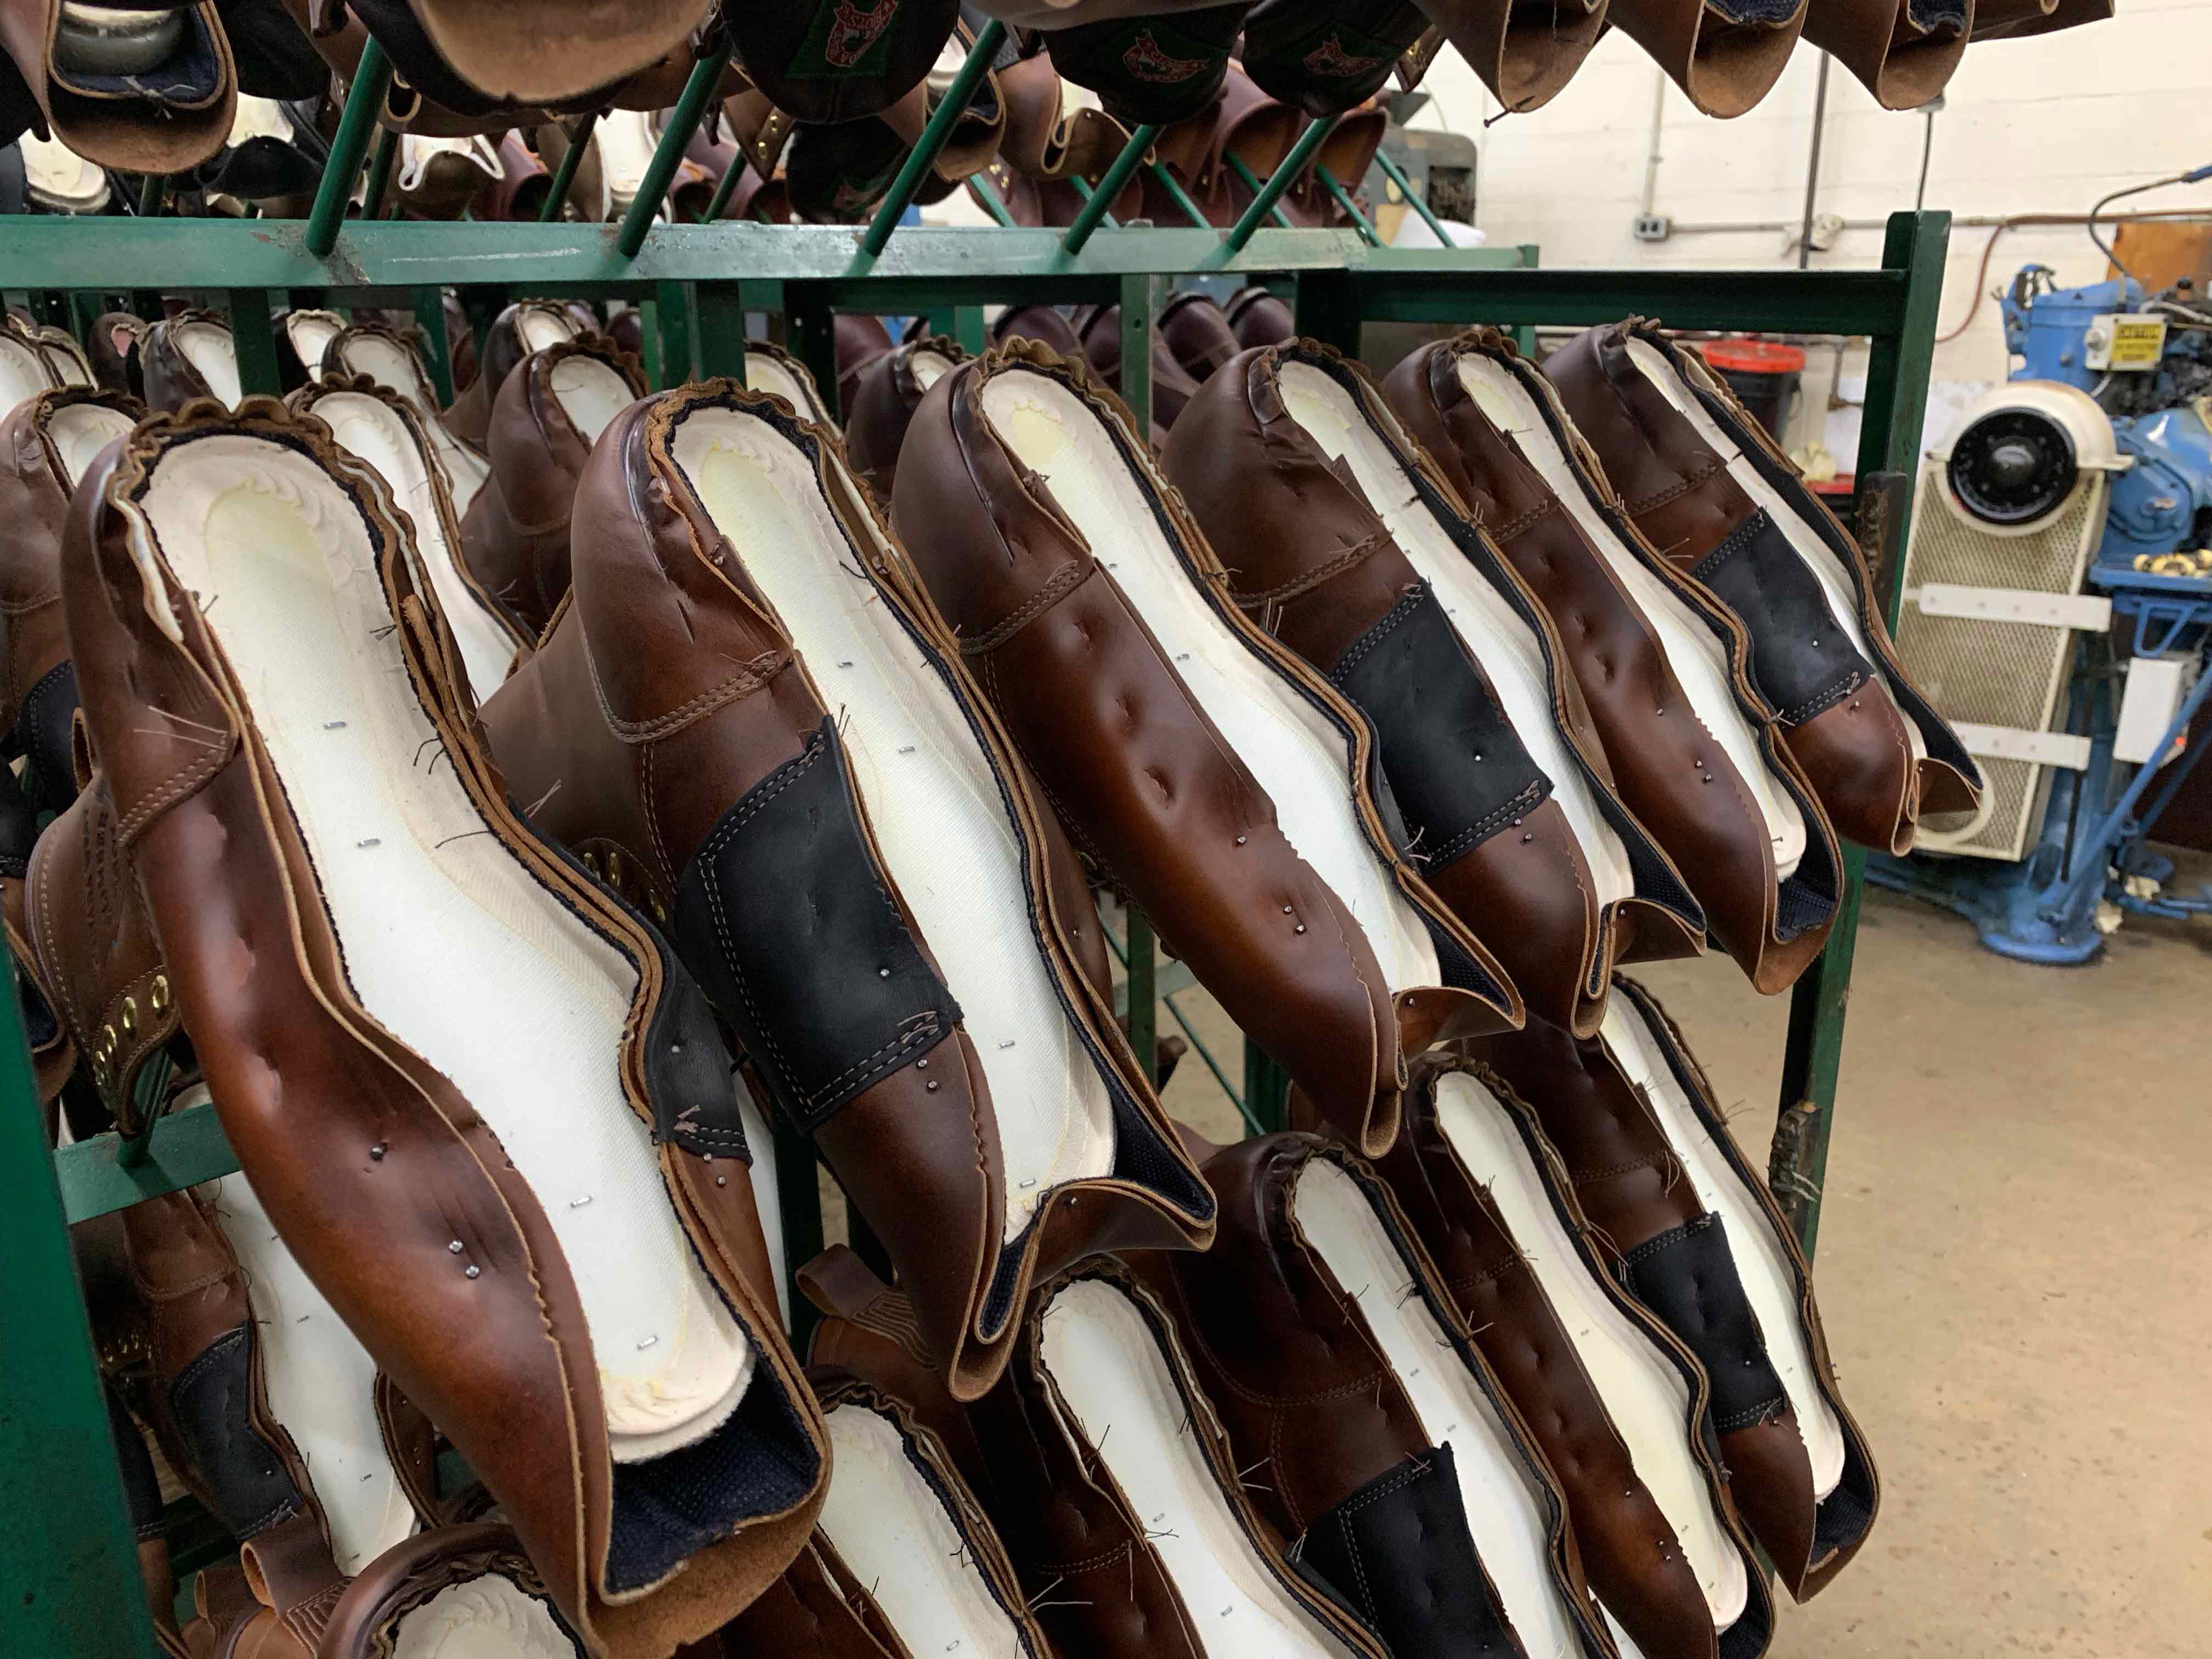 The shoes sit on racks, waiting for the next stage of the process.